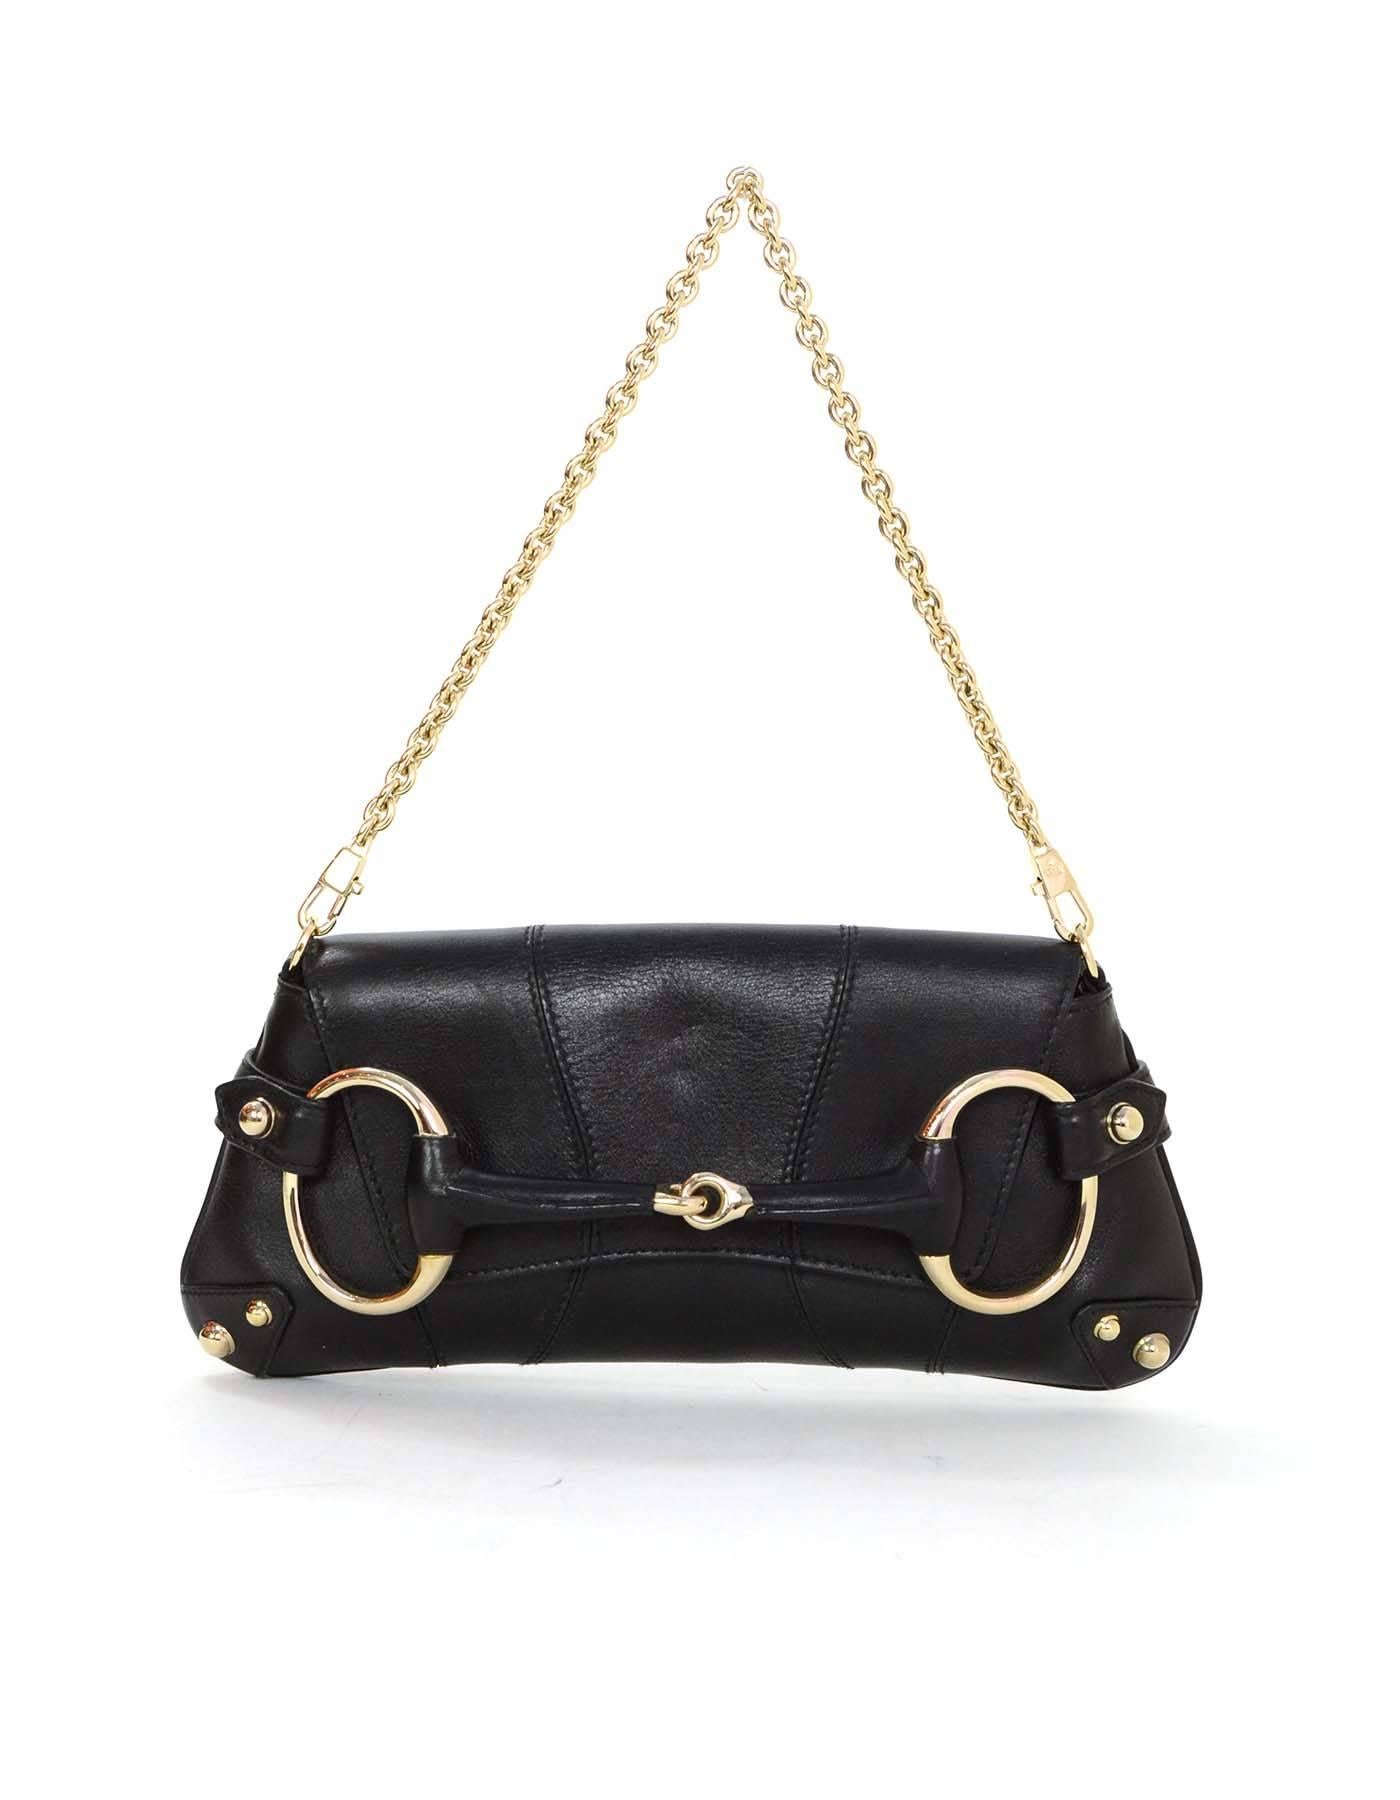 Gucci Black Leather Horsebit Clutch 
Features optional chainlink strap
Made In: Italy
Color: Black
Hardware: Goldtone
Materials: Leather
Lining: Black textile
Closure/Opening: Flap top that tucks into horsebit hardware
Exterior Pockets: